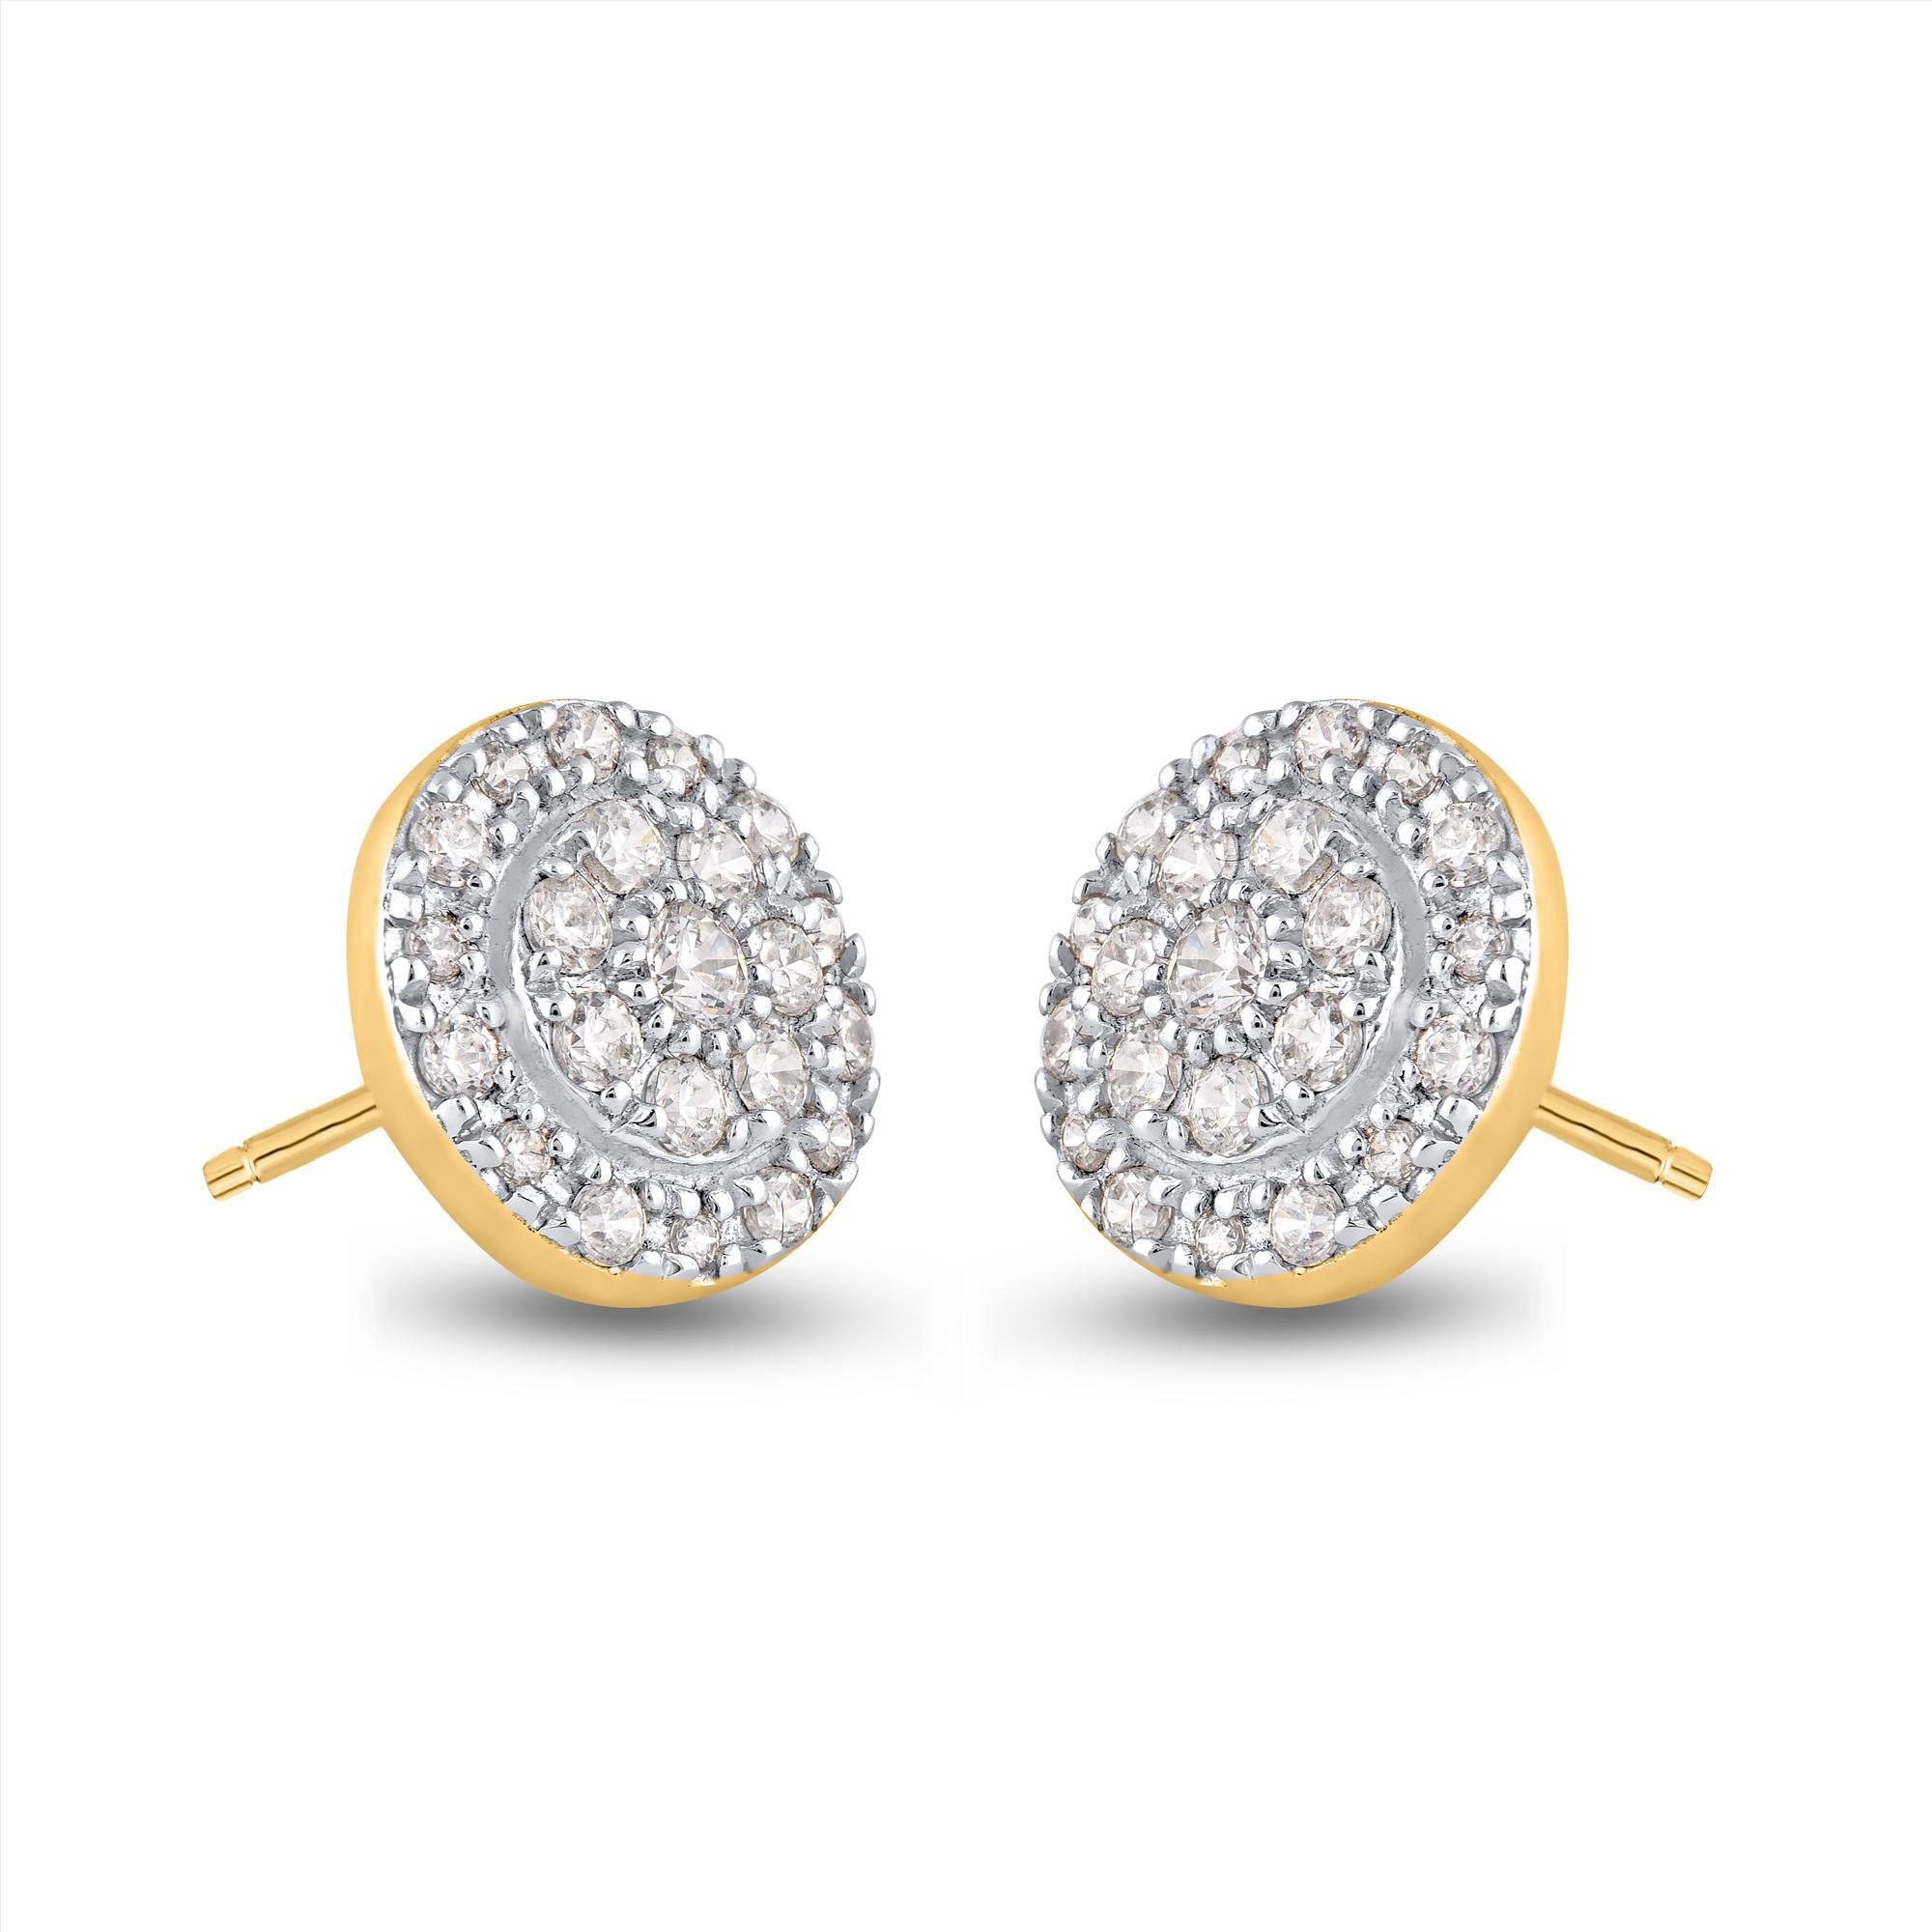 Ready for any occasions, these diamond frame stud earrings are shimmering look she'll wear with everything. The earrings is crafted from 14-karat Yellow gold and features Round-44 Natural white diamond set in Prong setting, H-I color I2 clarity. A